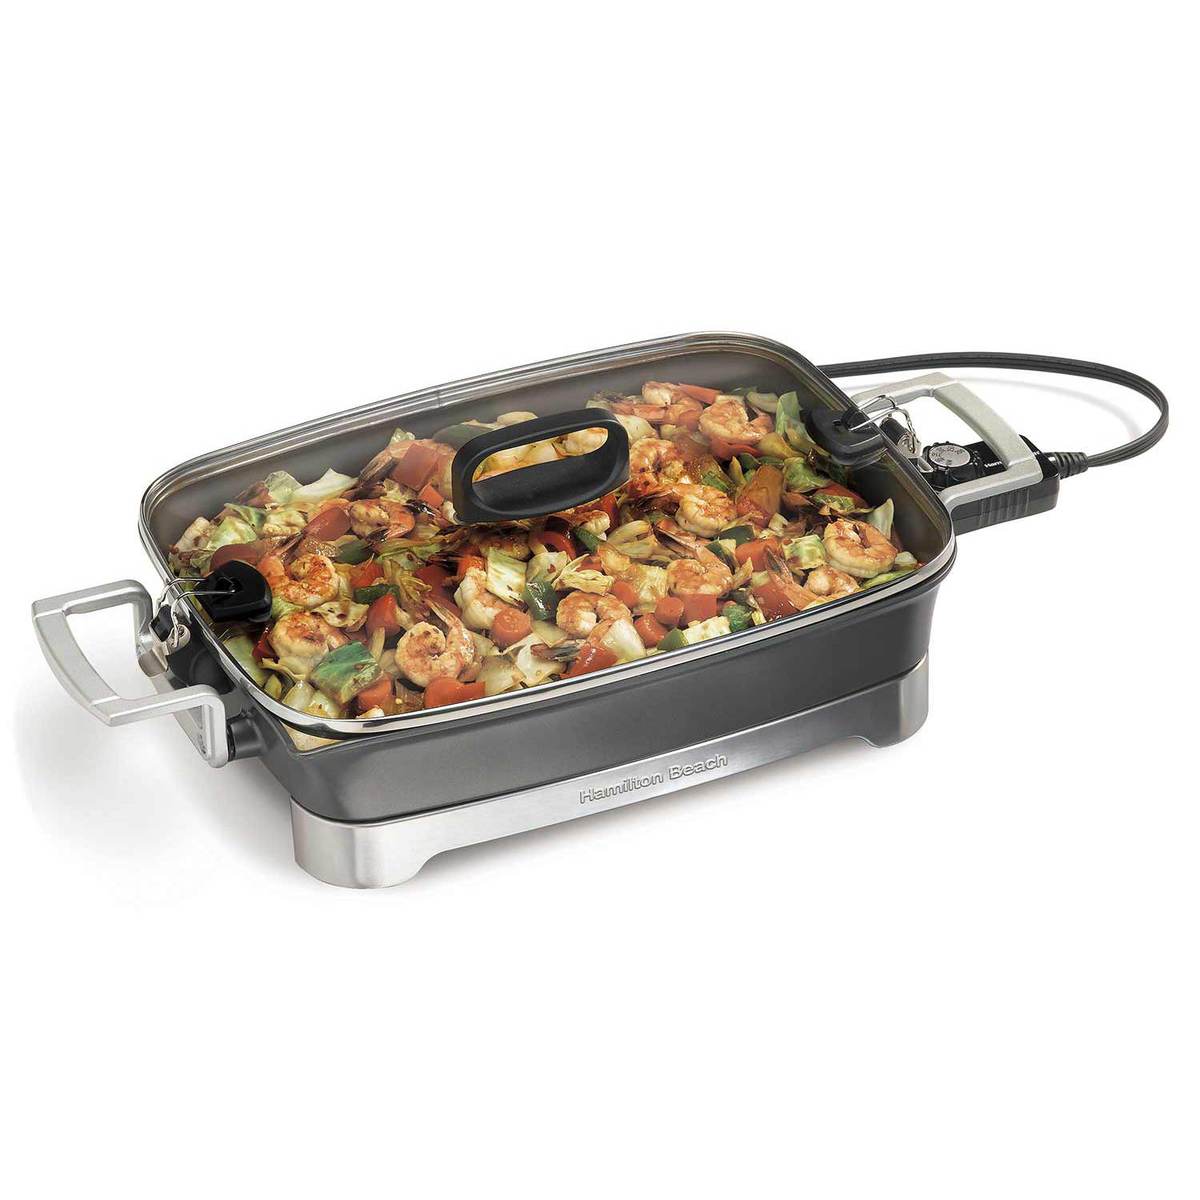 Premiere Cookware Electric Skillet (38540)